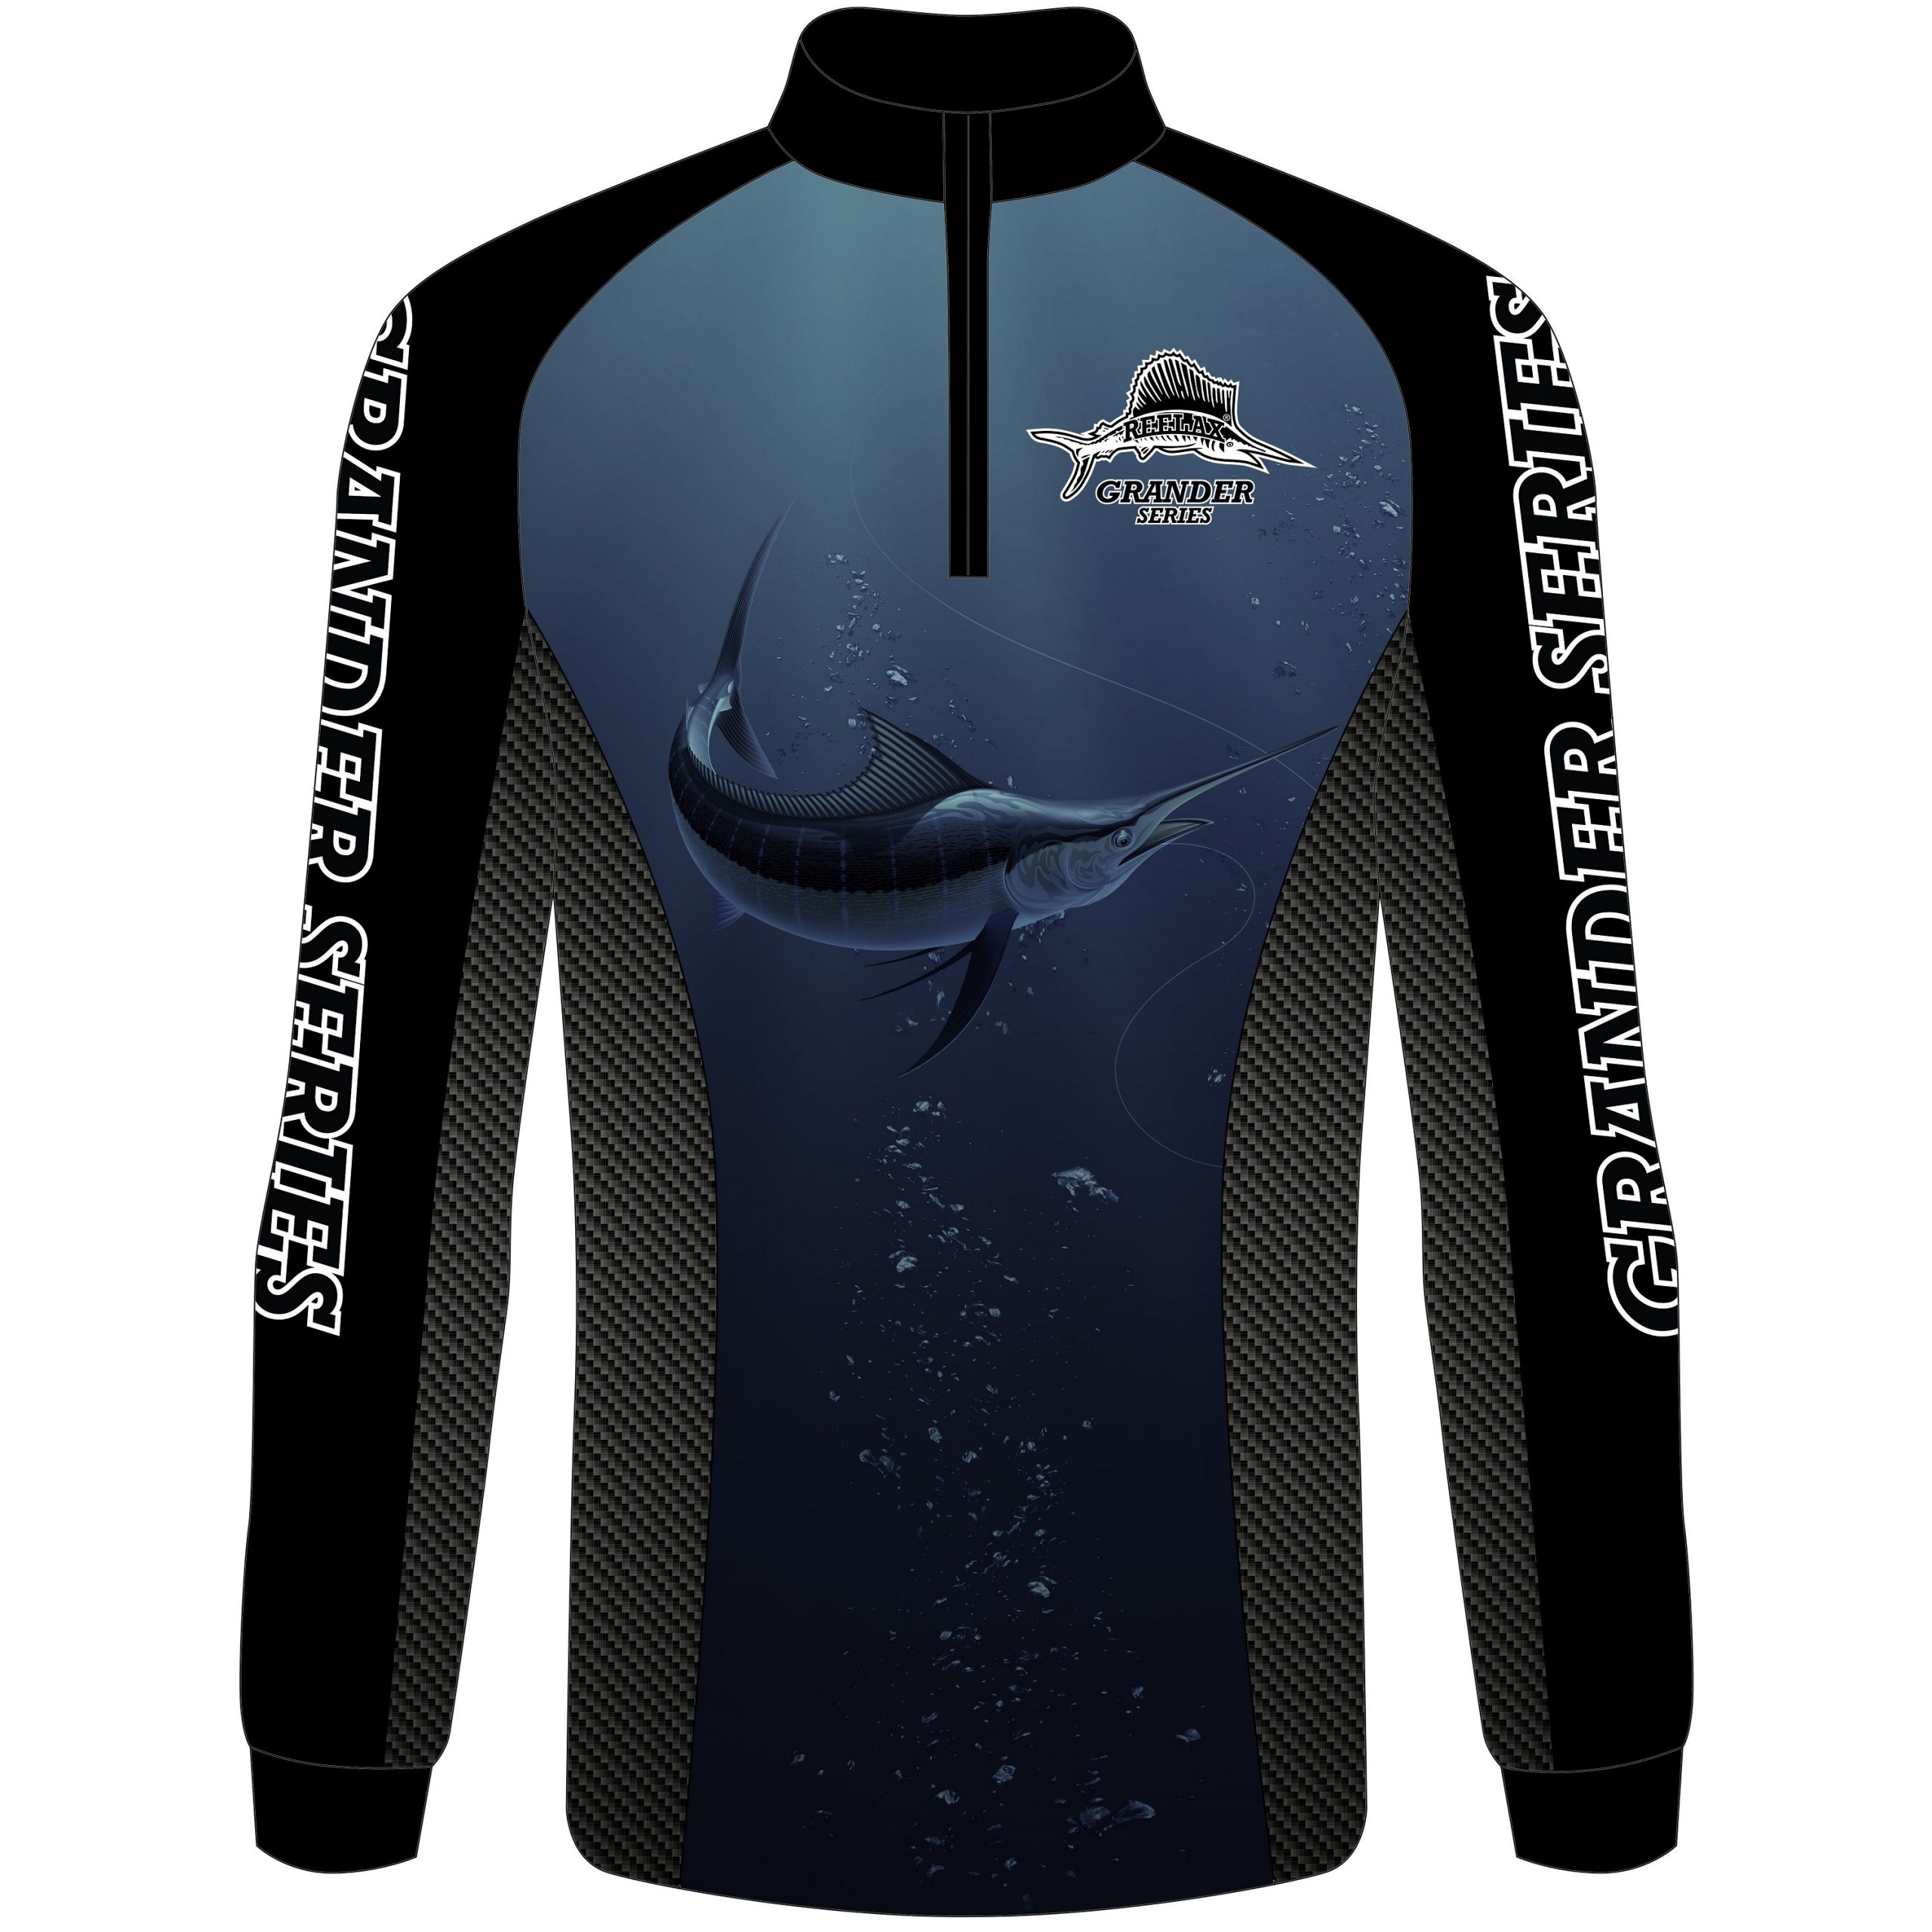 https://www.reelax.com.au/wp-content/uploads/2020/09/Reelax-Fishing-Shirt-Graphic-Male-Front-scaled.jpg